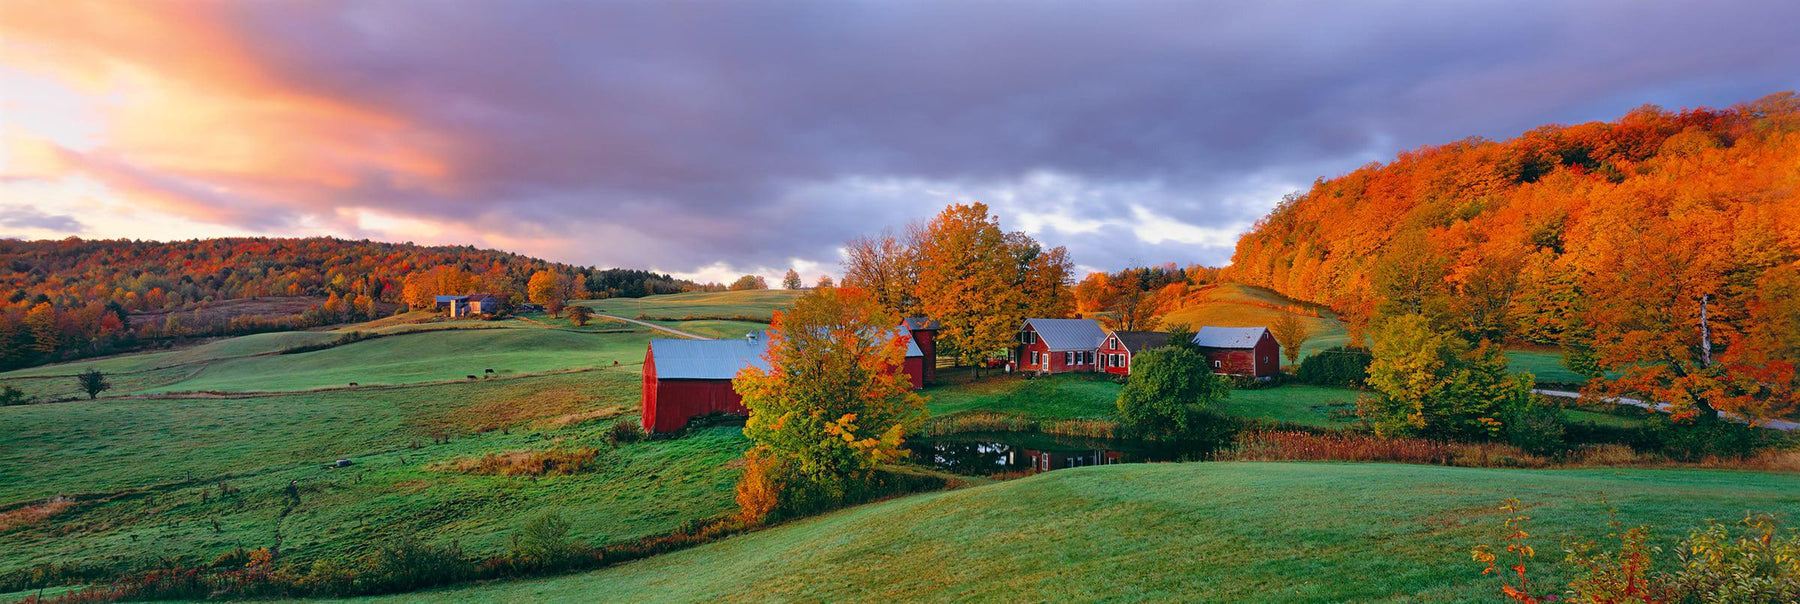 Red Barn and house of Jenne Farm Vermont in the middle of a field surrounded by trees in Autumn